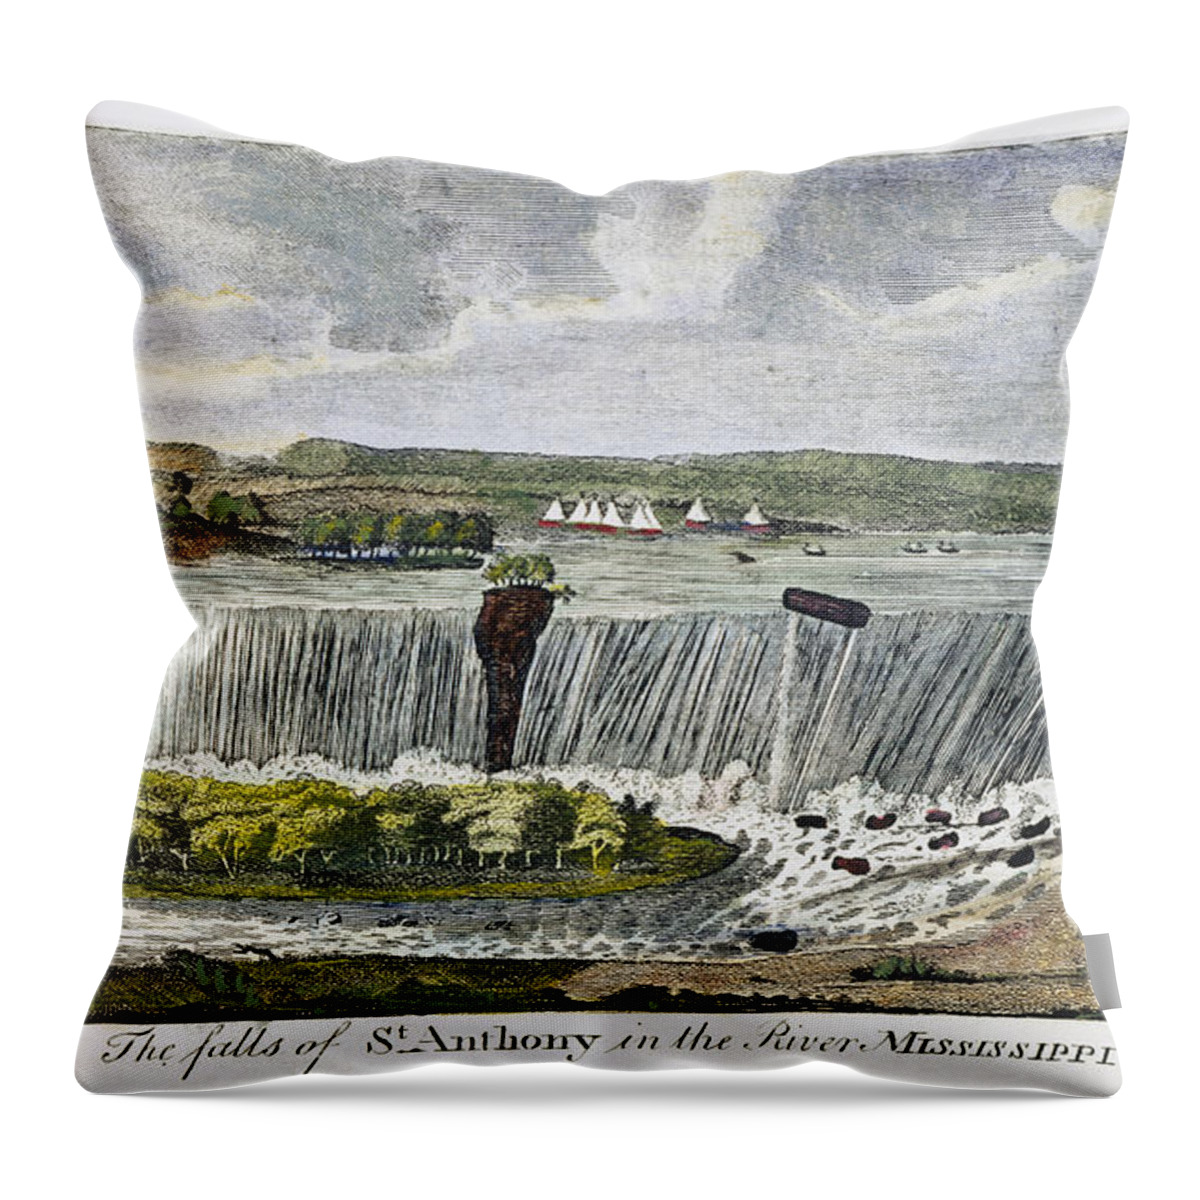 18th Century Throw Pillow featuring the photograph St. Anthony Falls, Mn by Granger